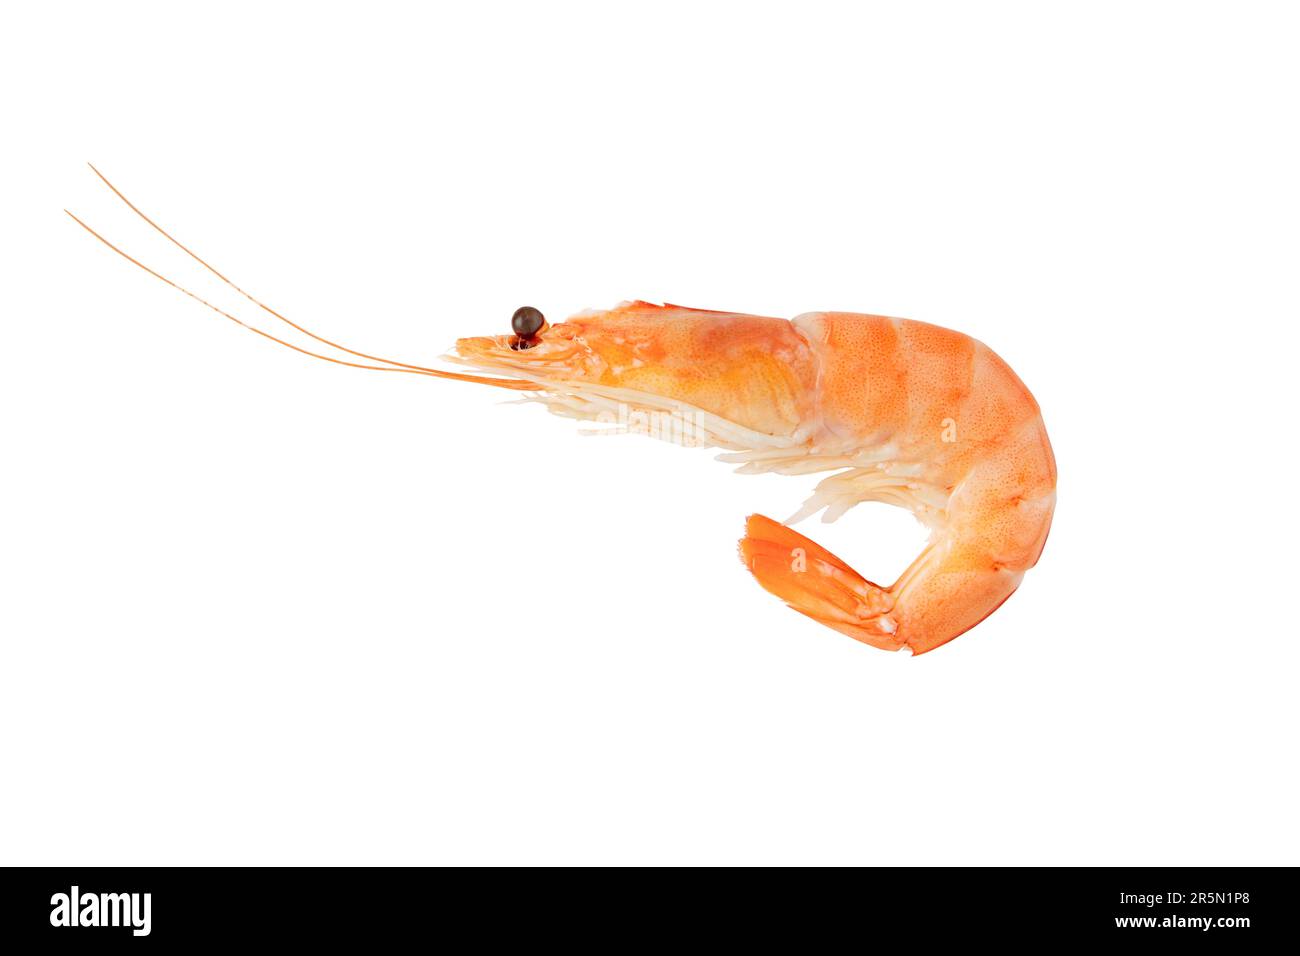 Cooked prawn isolated on white. Boiled shrimp ready to eat. Stock Photo